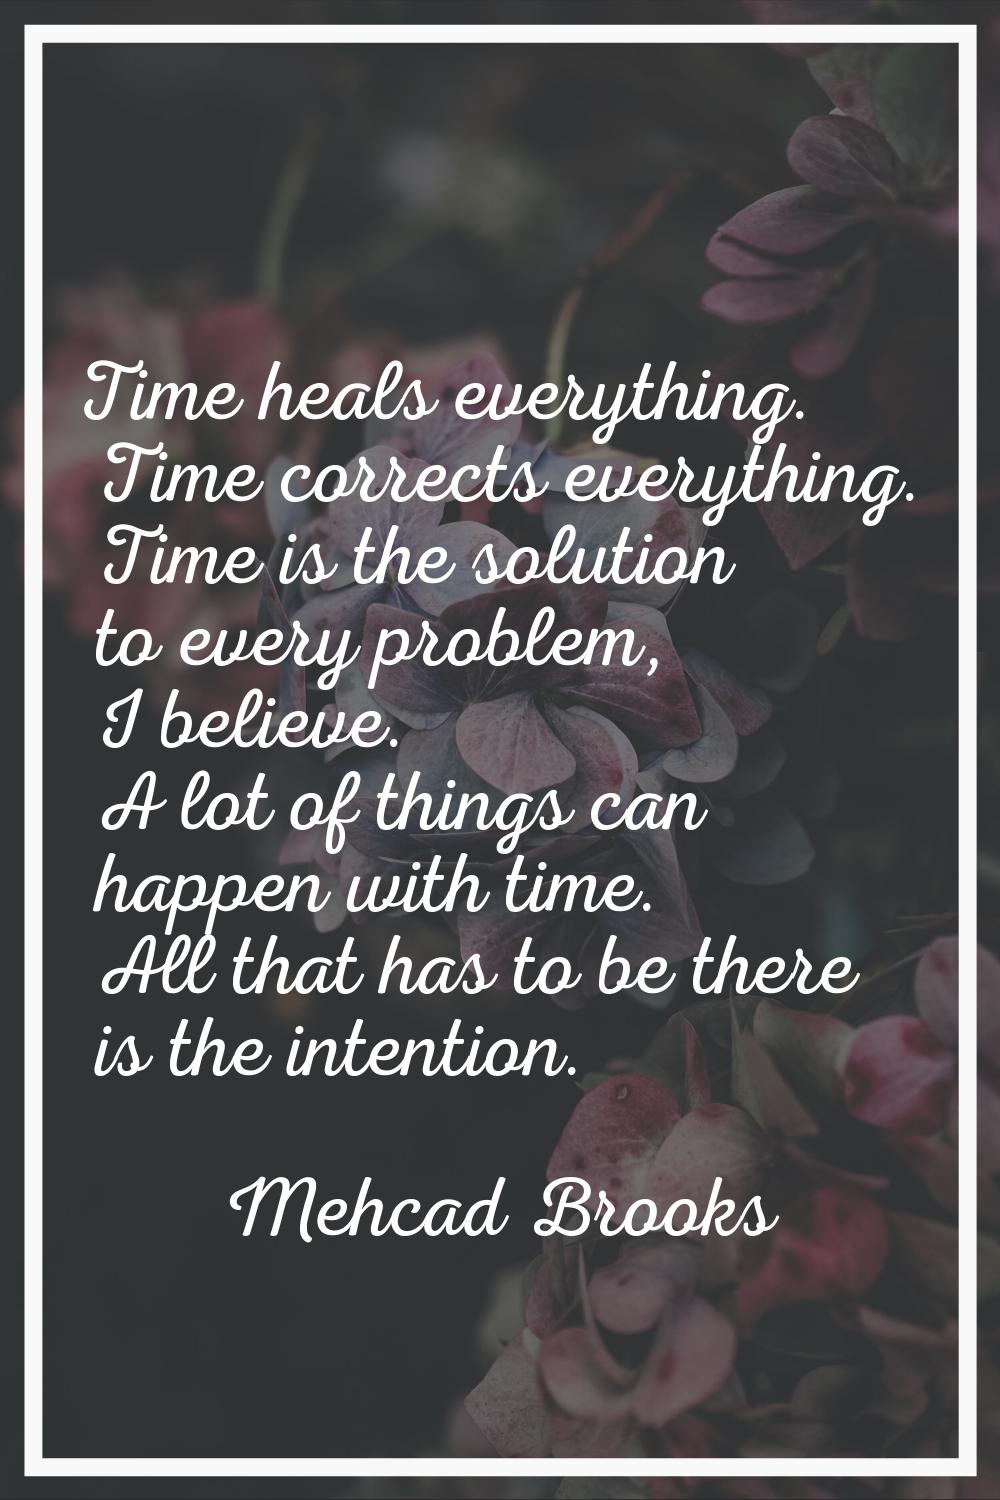 Time heals everything. Time corrects everything. Time is the solution to every problem, I believe. 